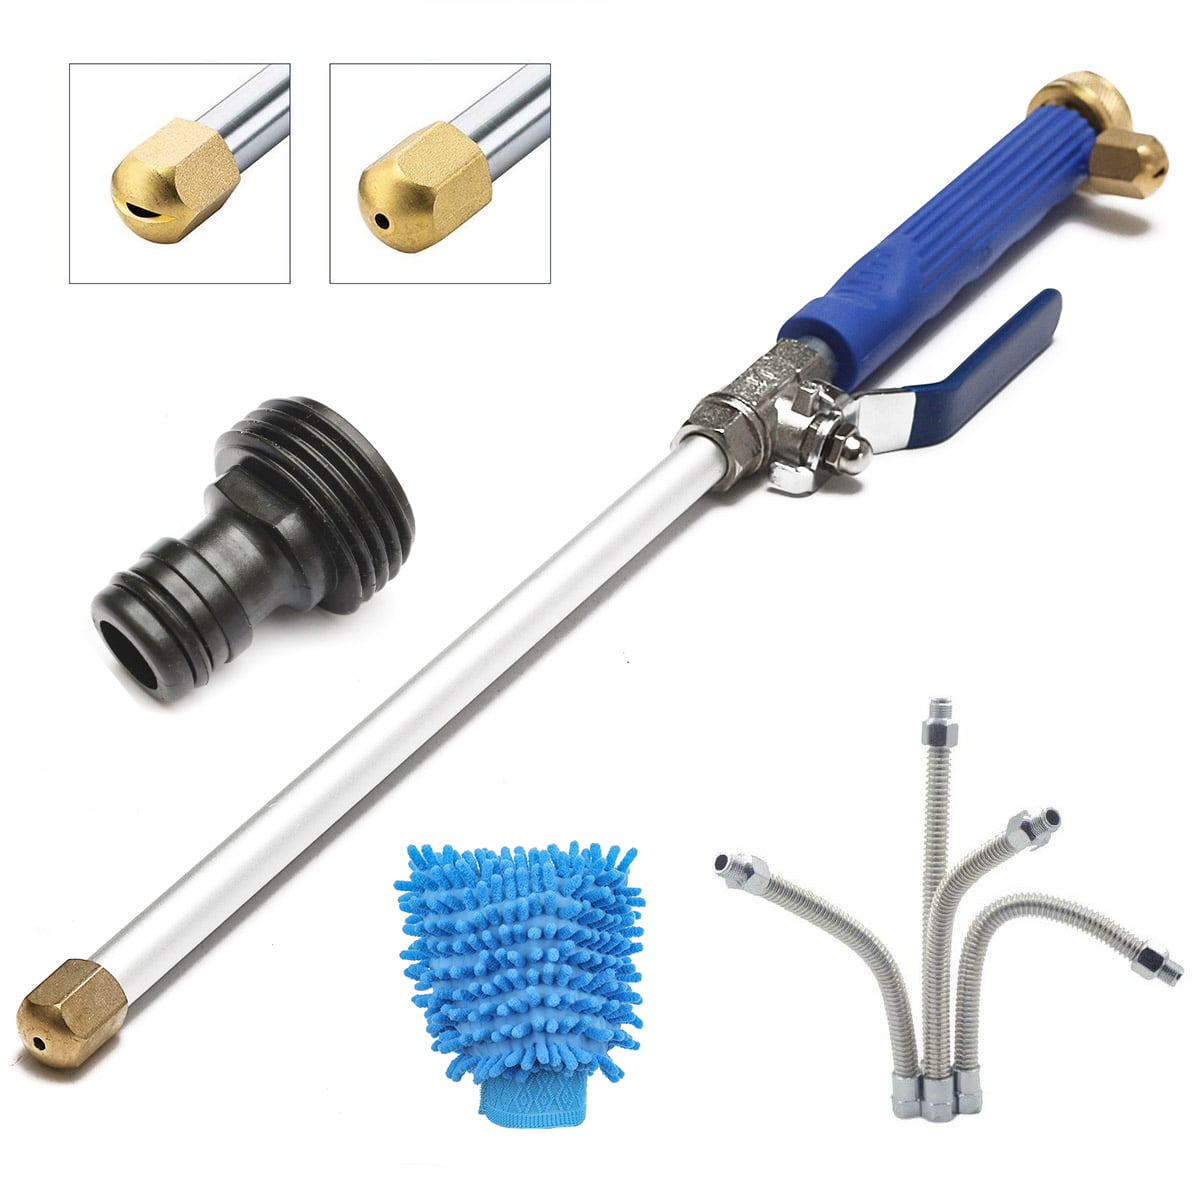 Hydro Jet Water Hose Nozzle,Watering Sprayer Cleaning Tool High Pressure Power Washer wand Wand Lance for Gutter Patio Car Pet Window Glass Black 